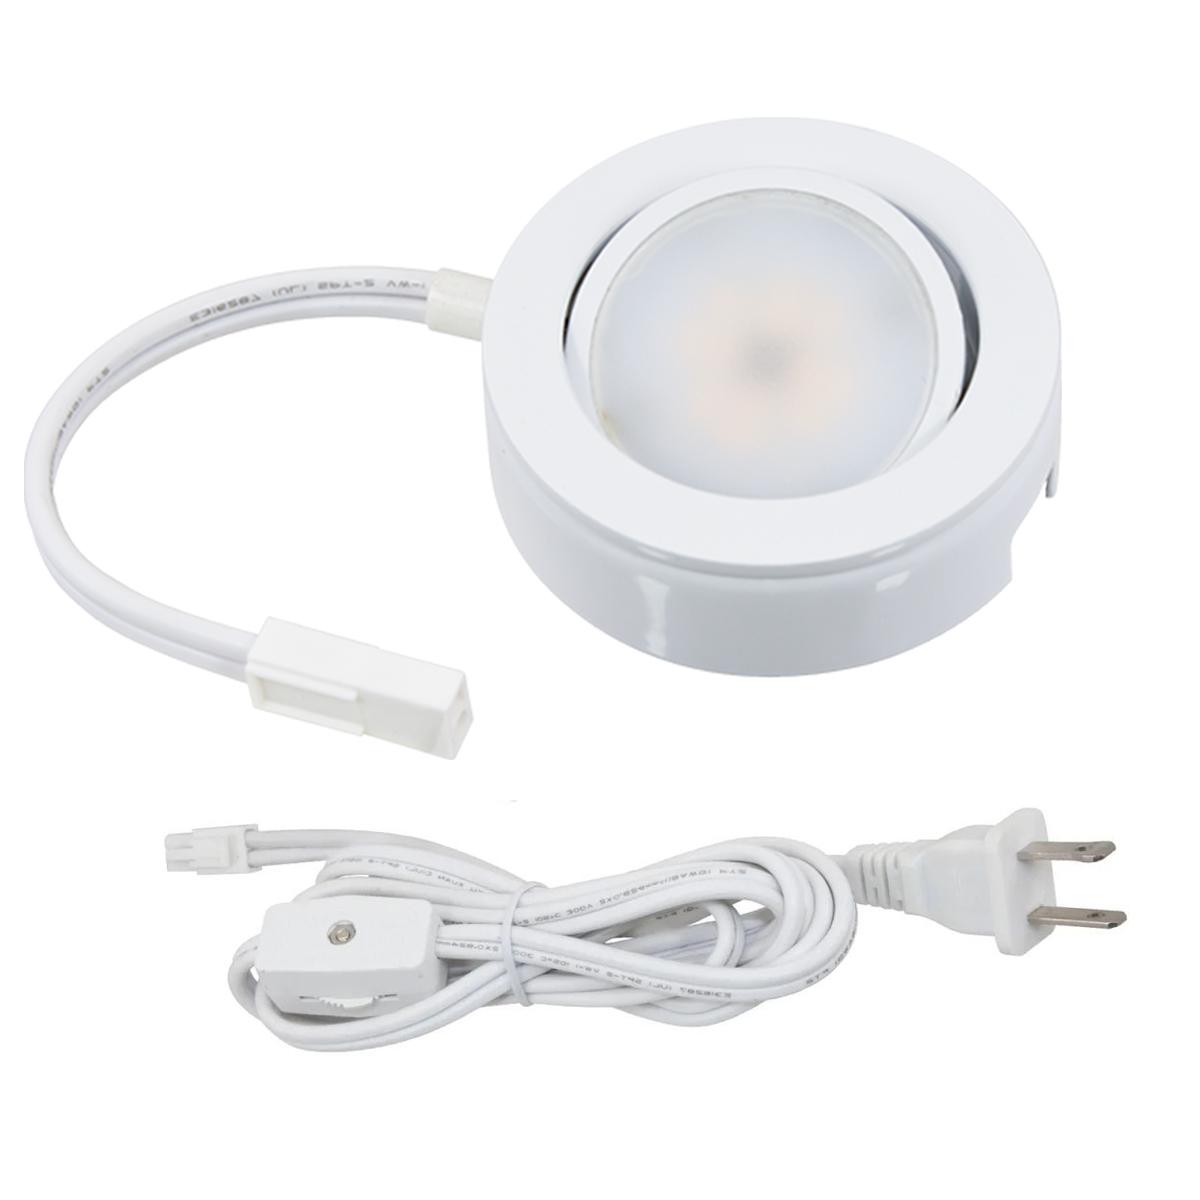 MVP Swivel LED Puck Light with 6in Lead Wire and Power Cord, 2700K, 120V, White